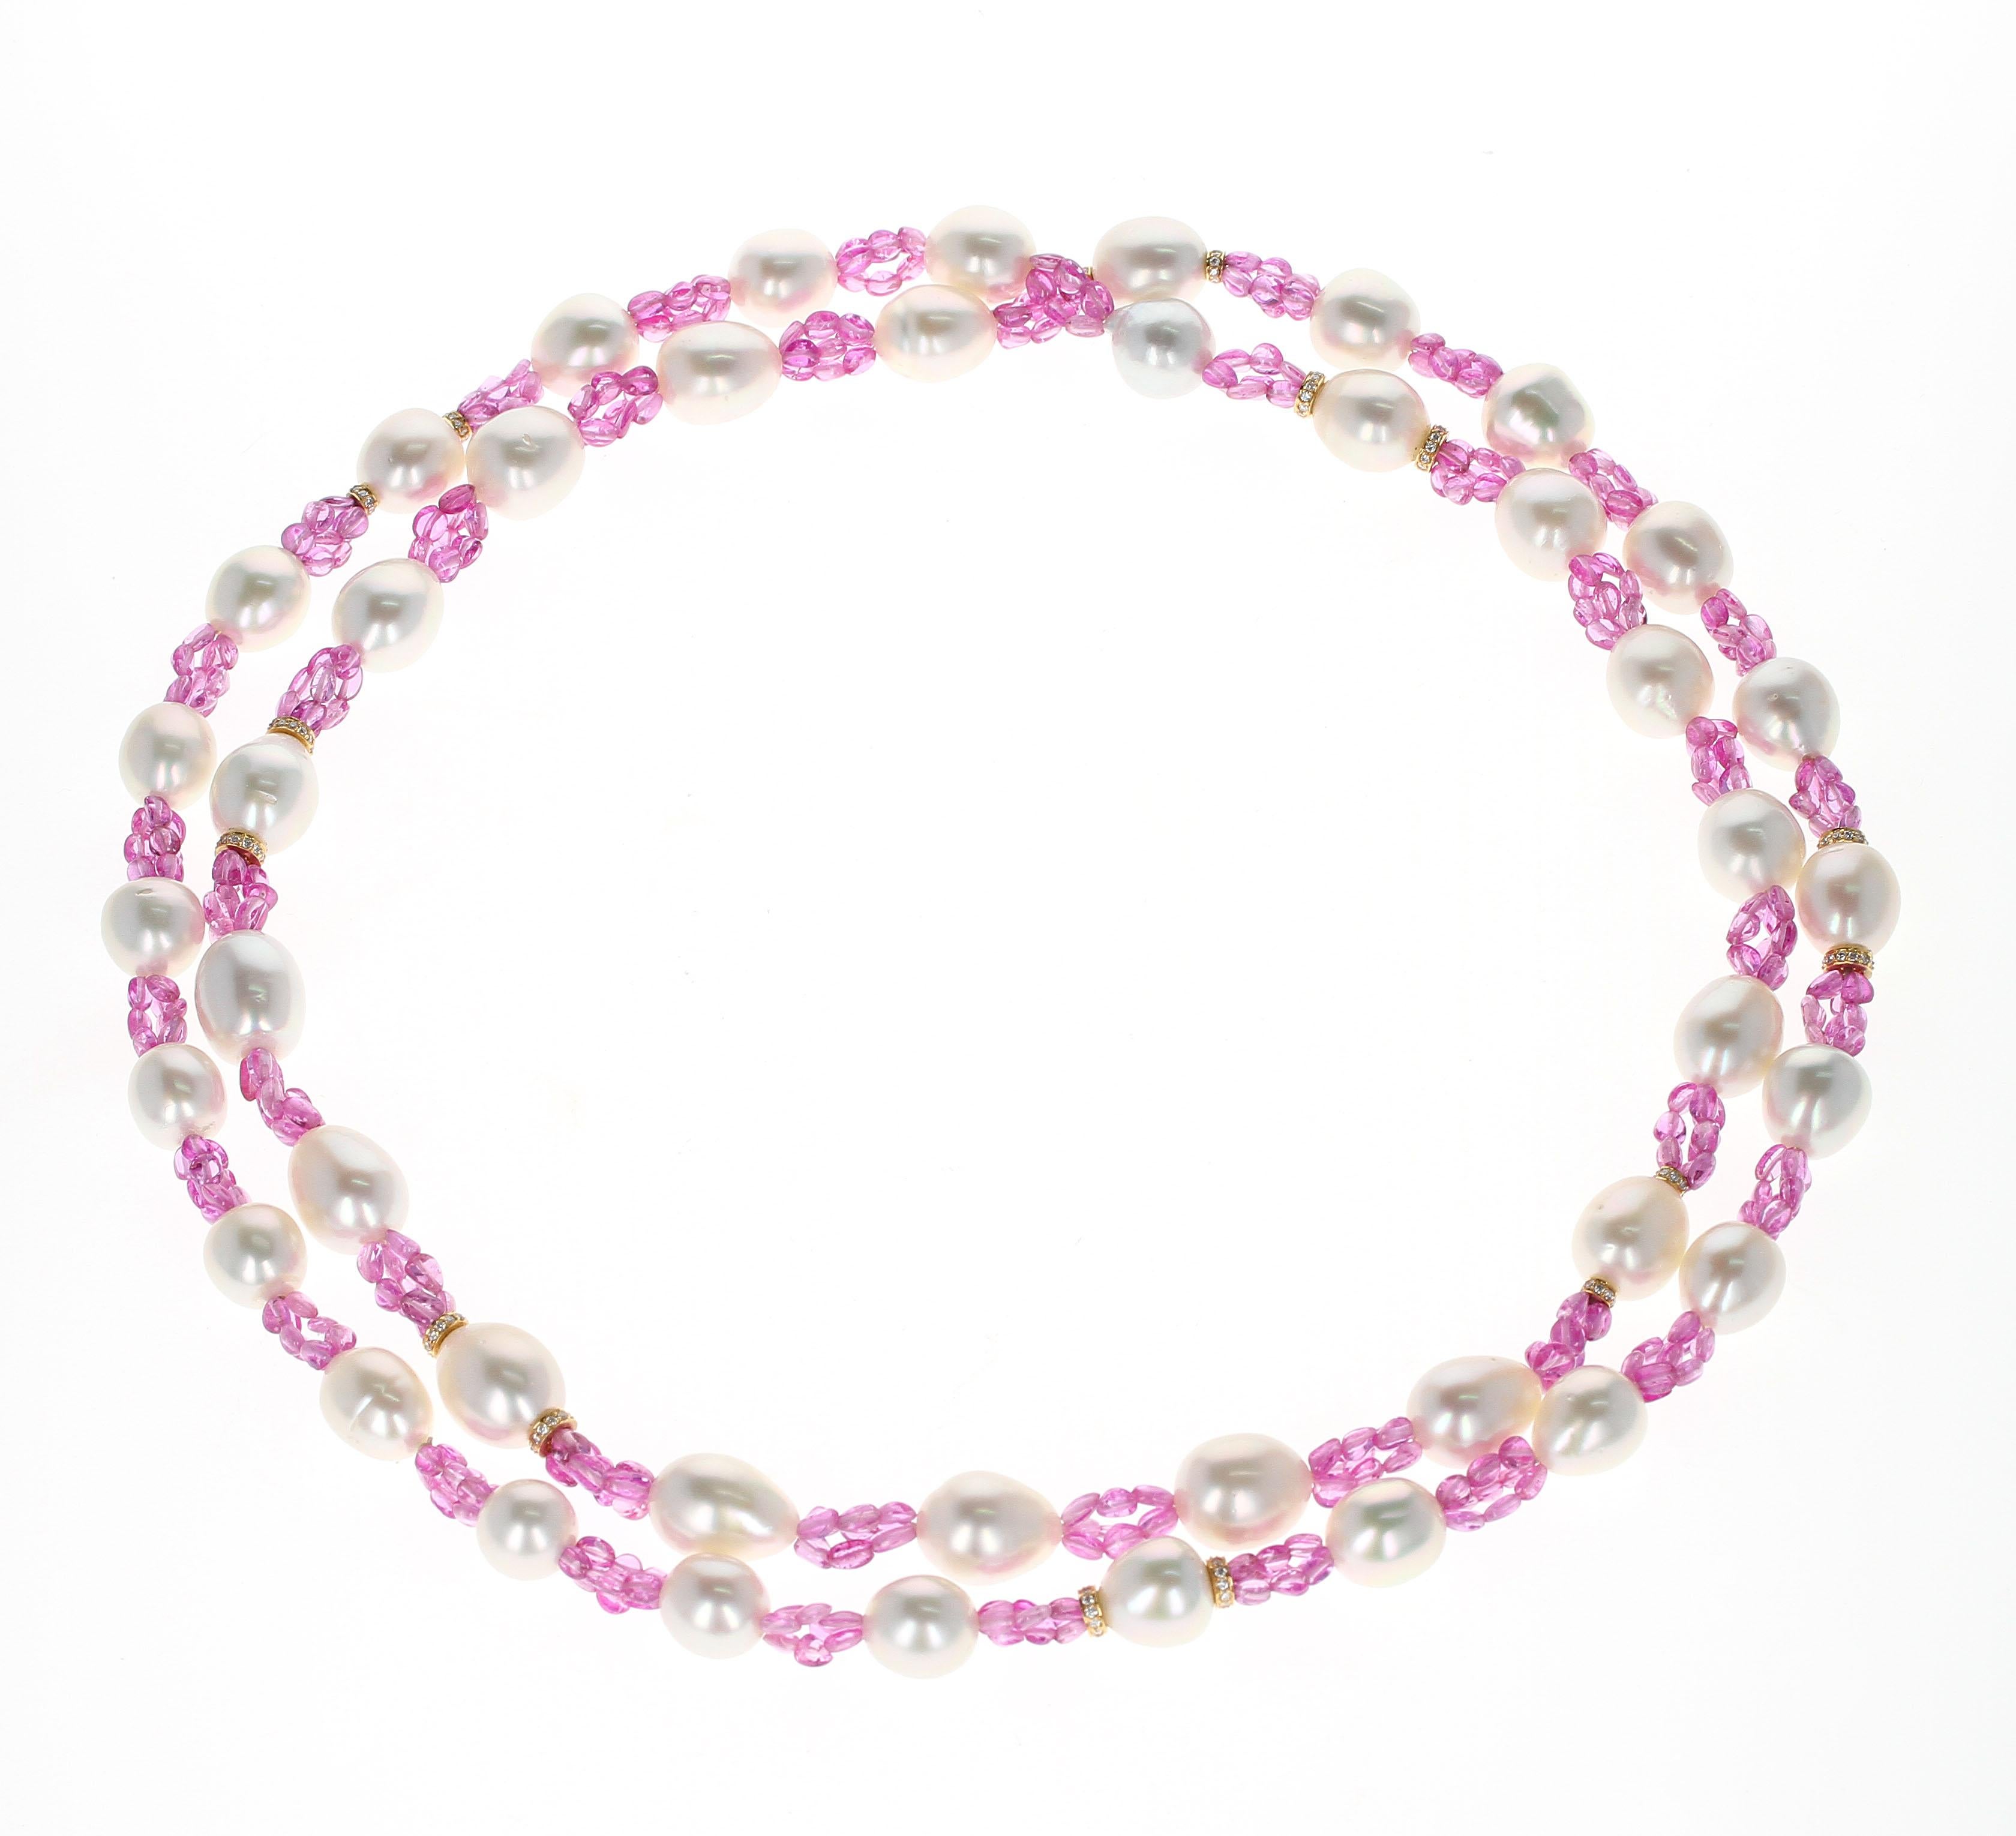 Bead South Sea Pearl, Pink Sapphire, and Diamond and Gold Roundels Necklace